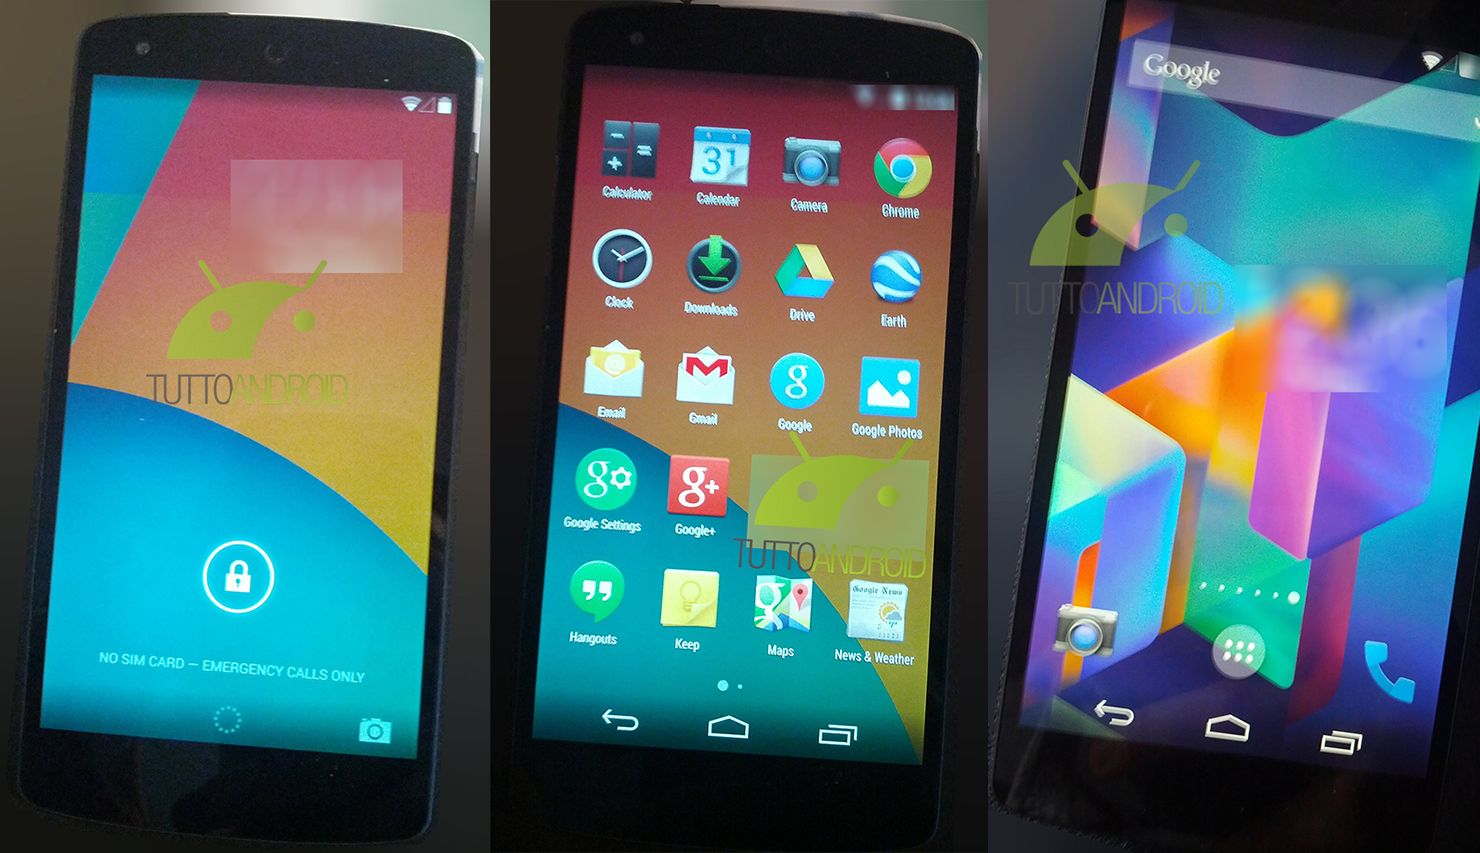 new nexus 5 pictures show android 4 4 kitkat in full swing image 1